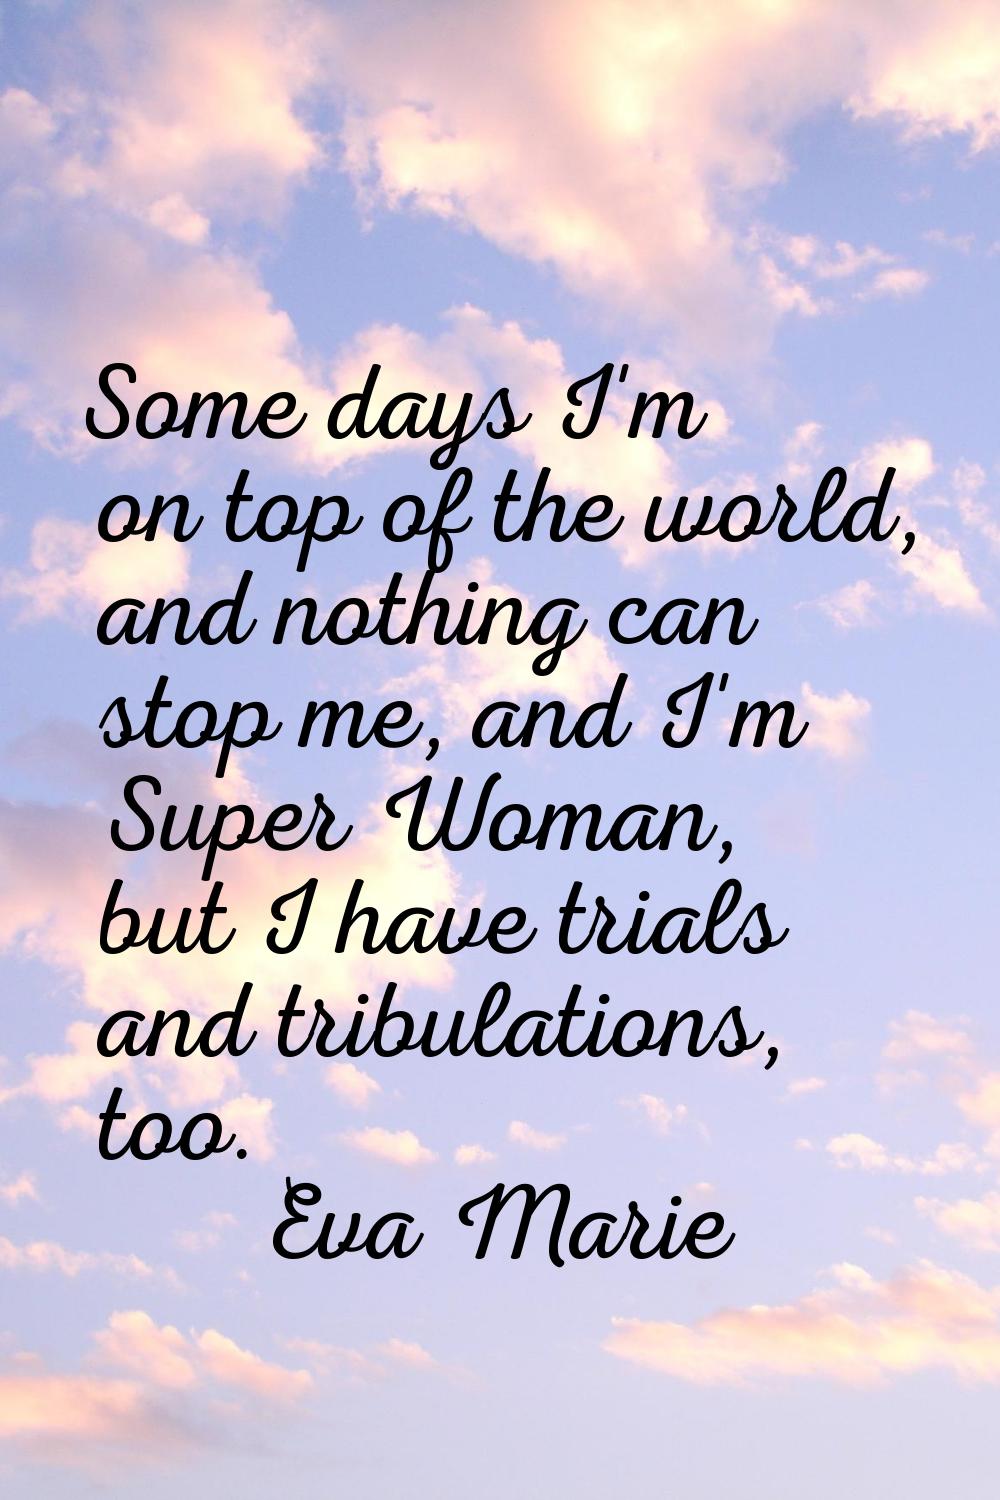 Some days I'm on top of the world, and nothing can stop me, and I'm Super Woman, but I have trials 